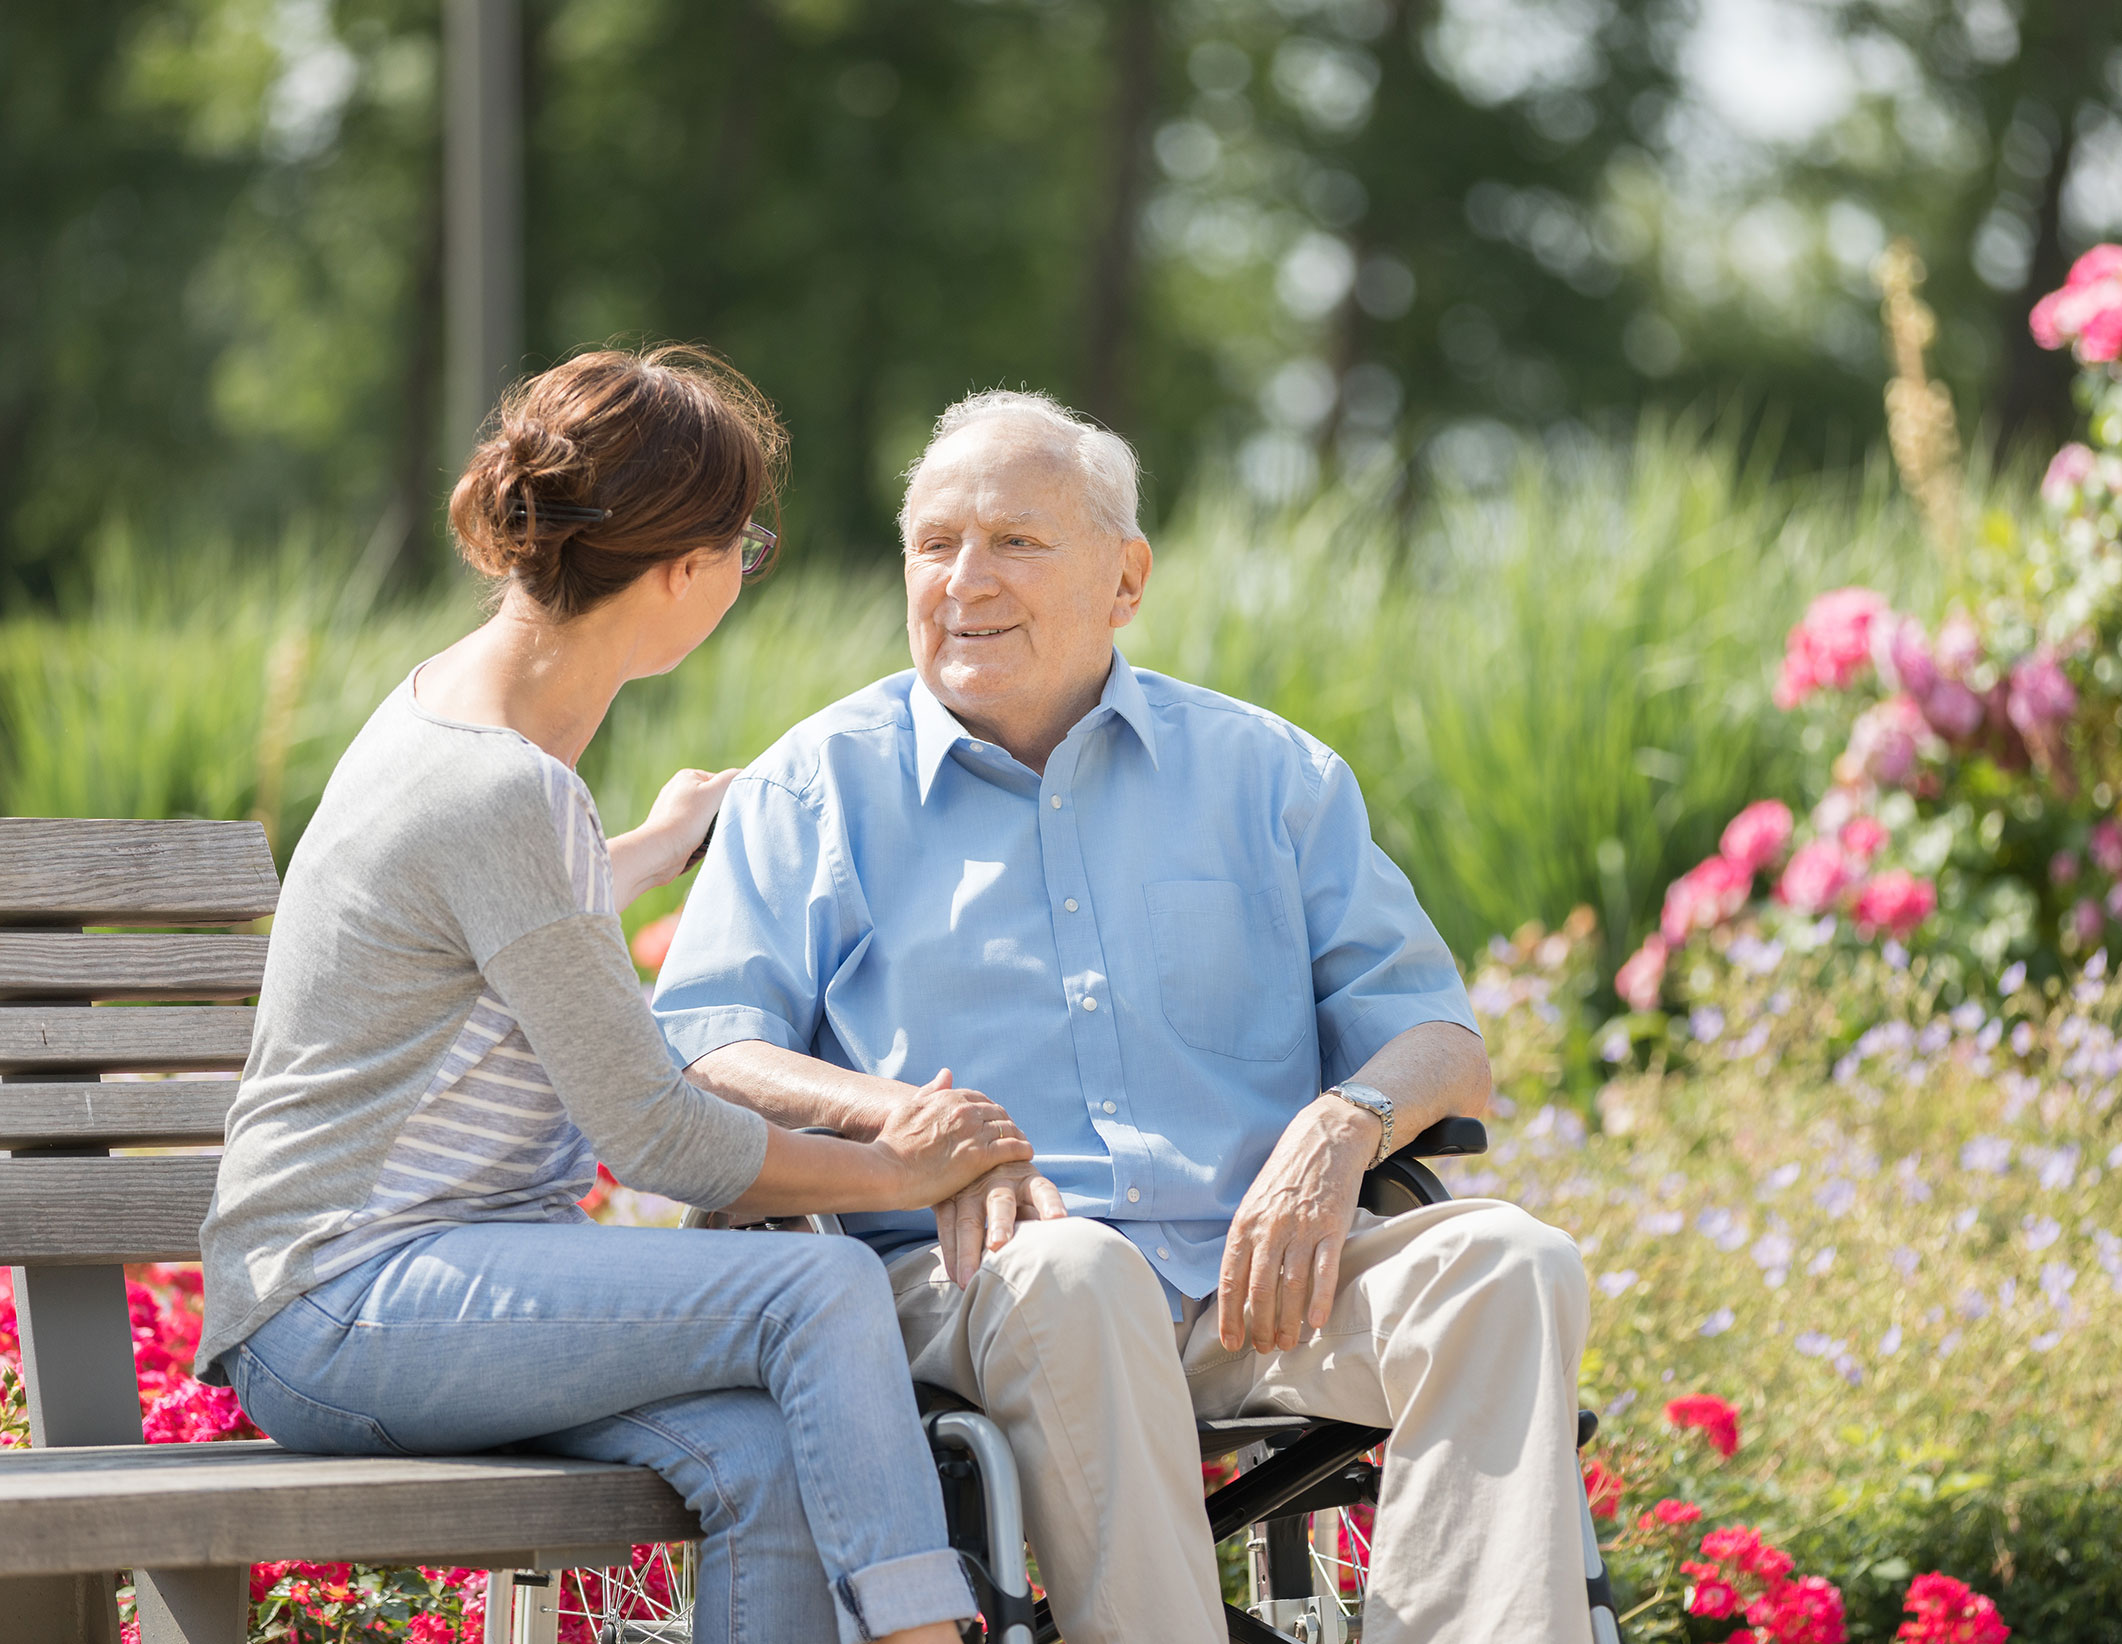 Senior man chatting with his adult daughter outside on a bench